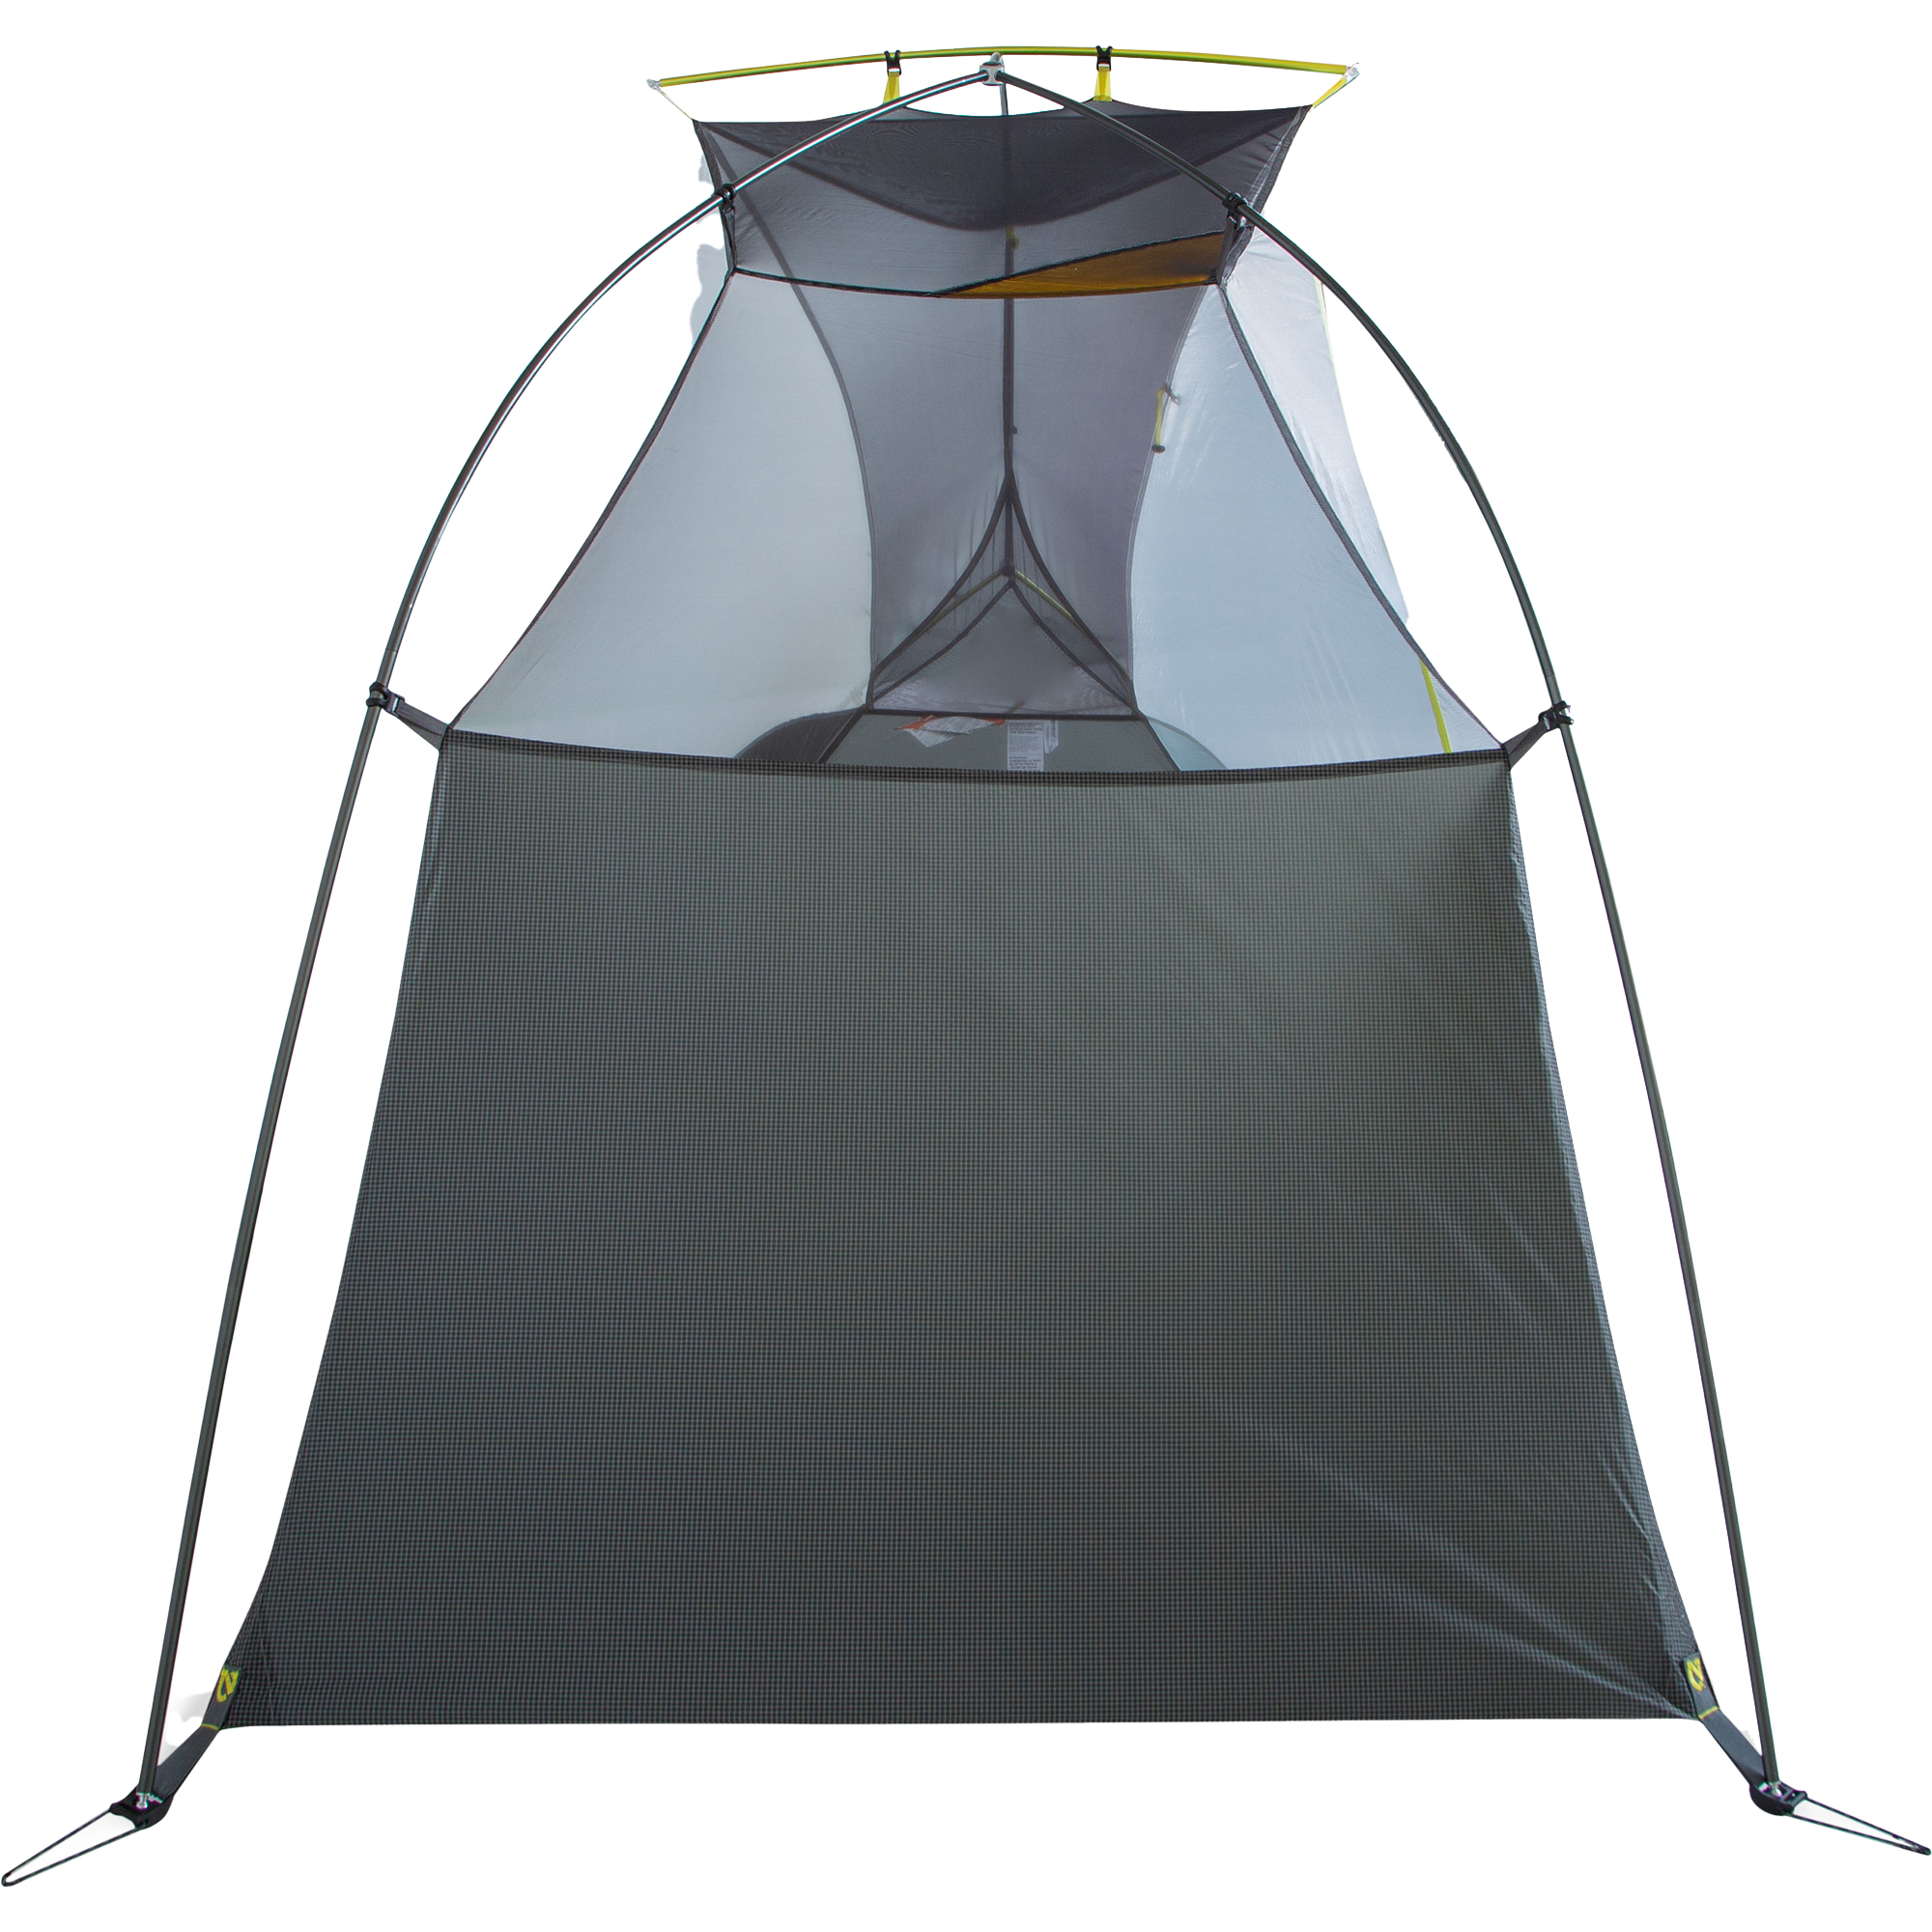 Nemo Dragonfly OSMO 1 Ultralight Backpacking Tent